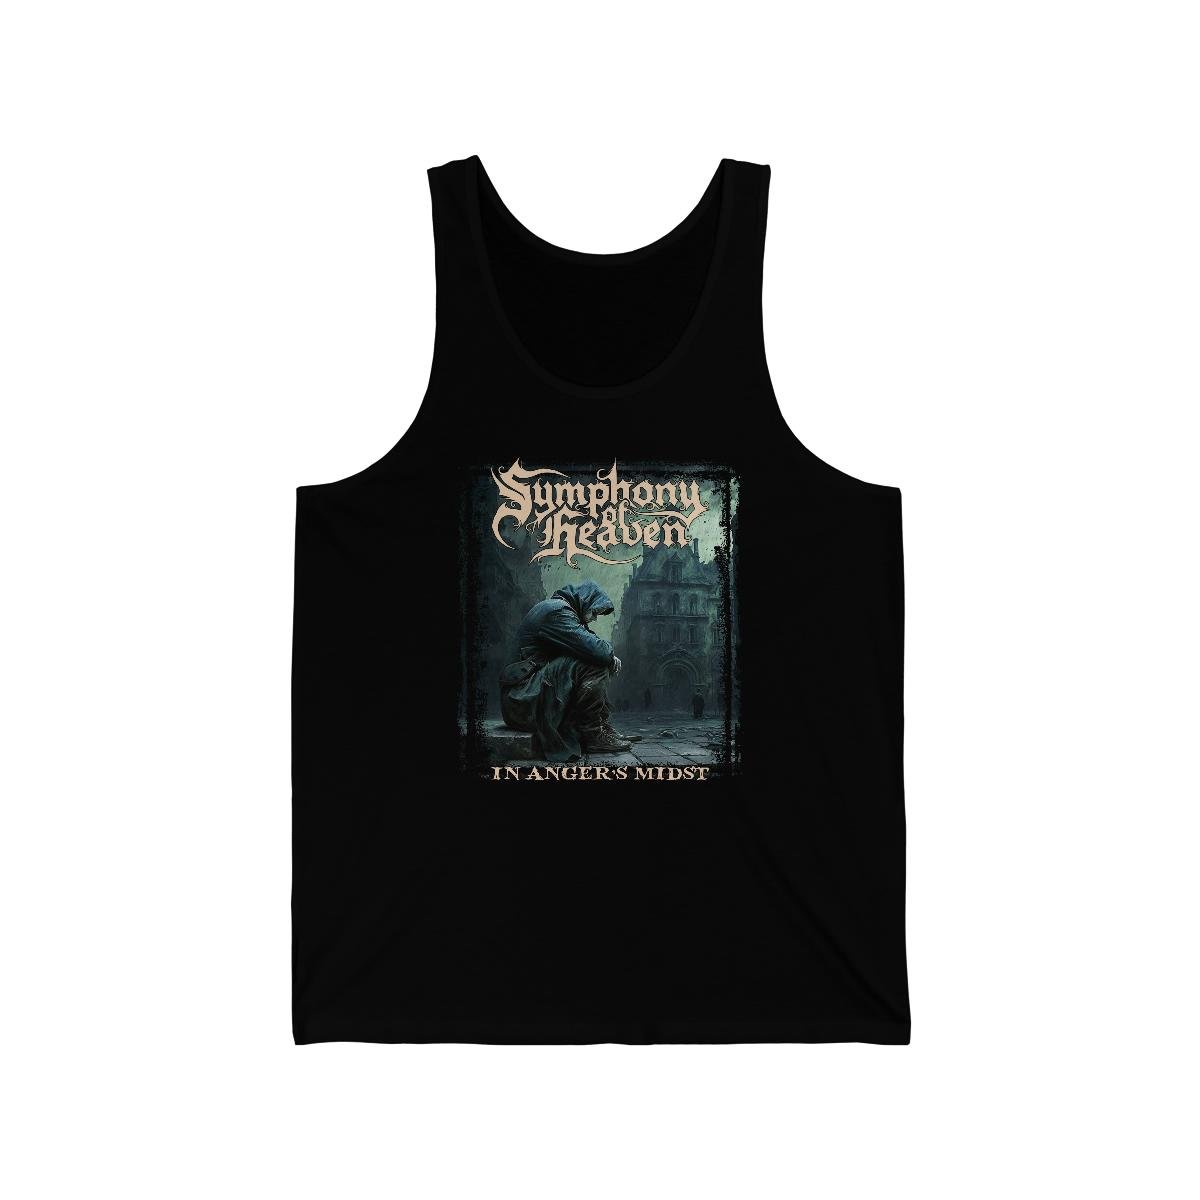 Symphony Of Heaven – In Anger’s Midst Unisex Jersey Tank Top